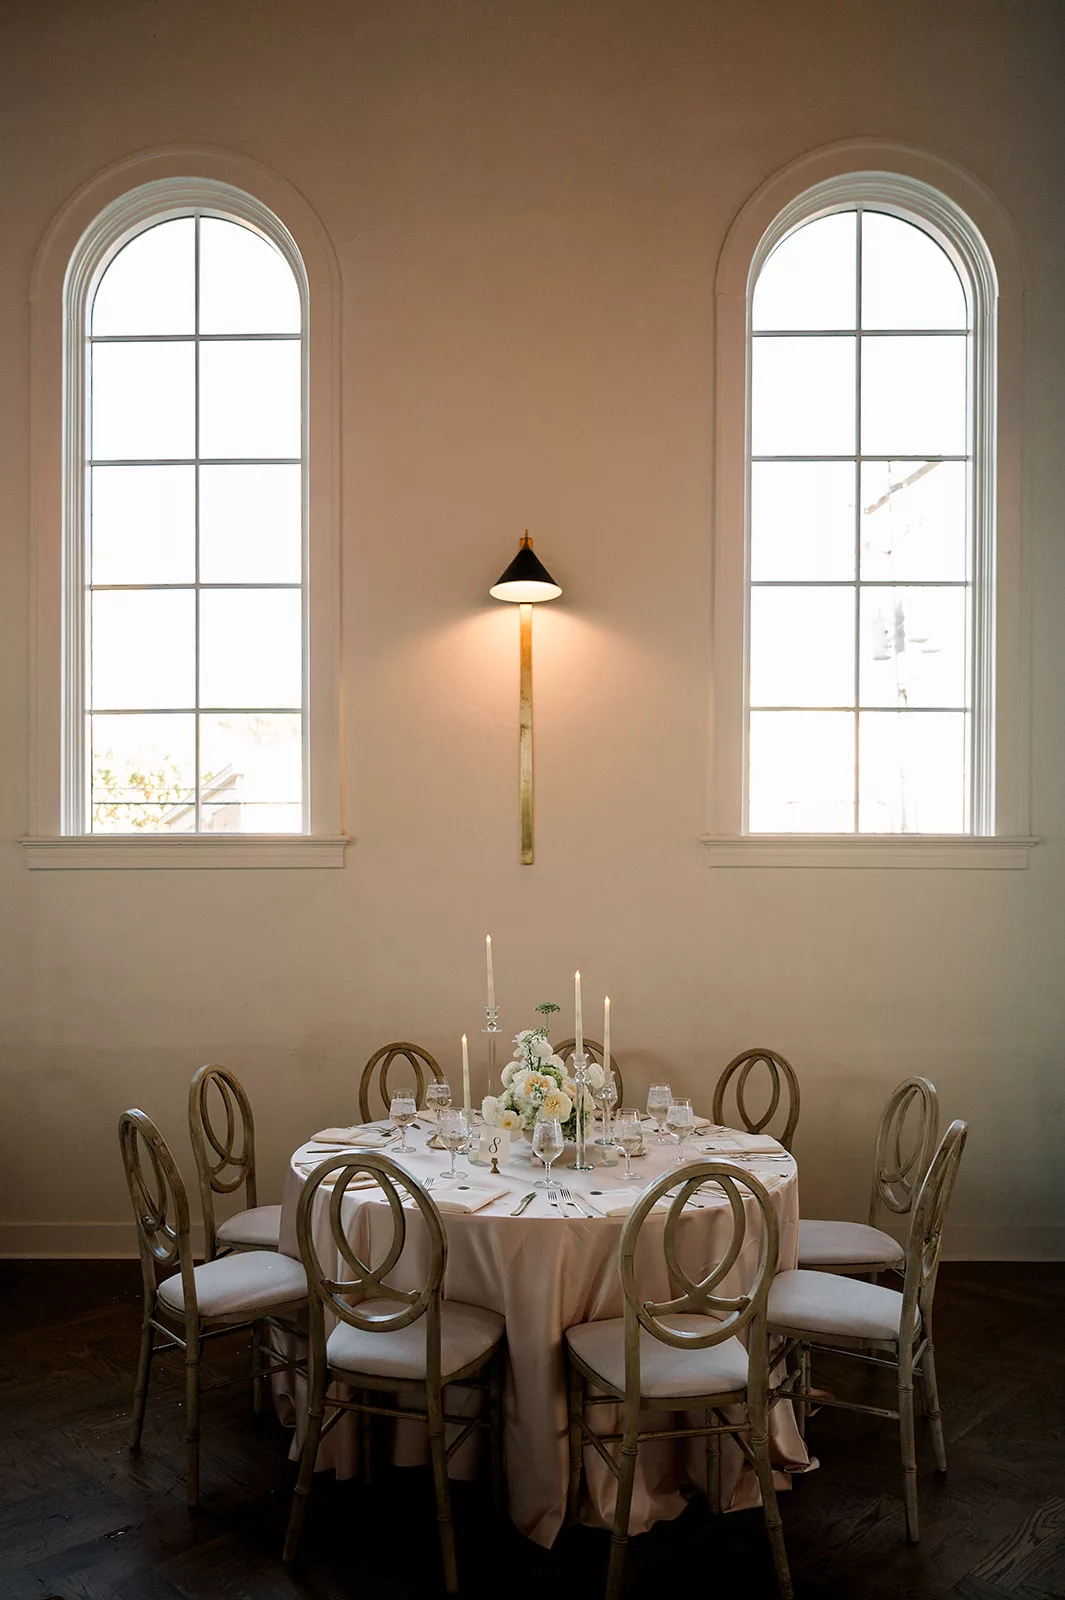 Details of a round wedding reception table set up under two large windows